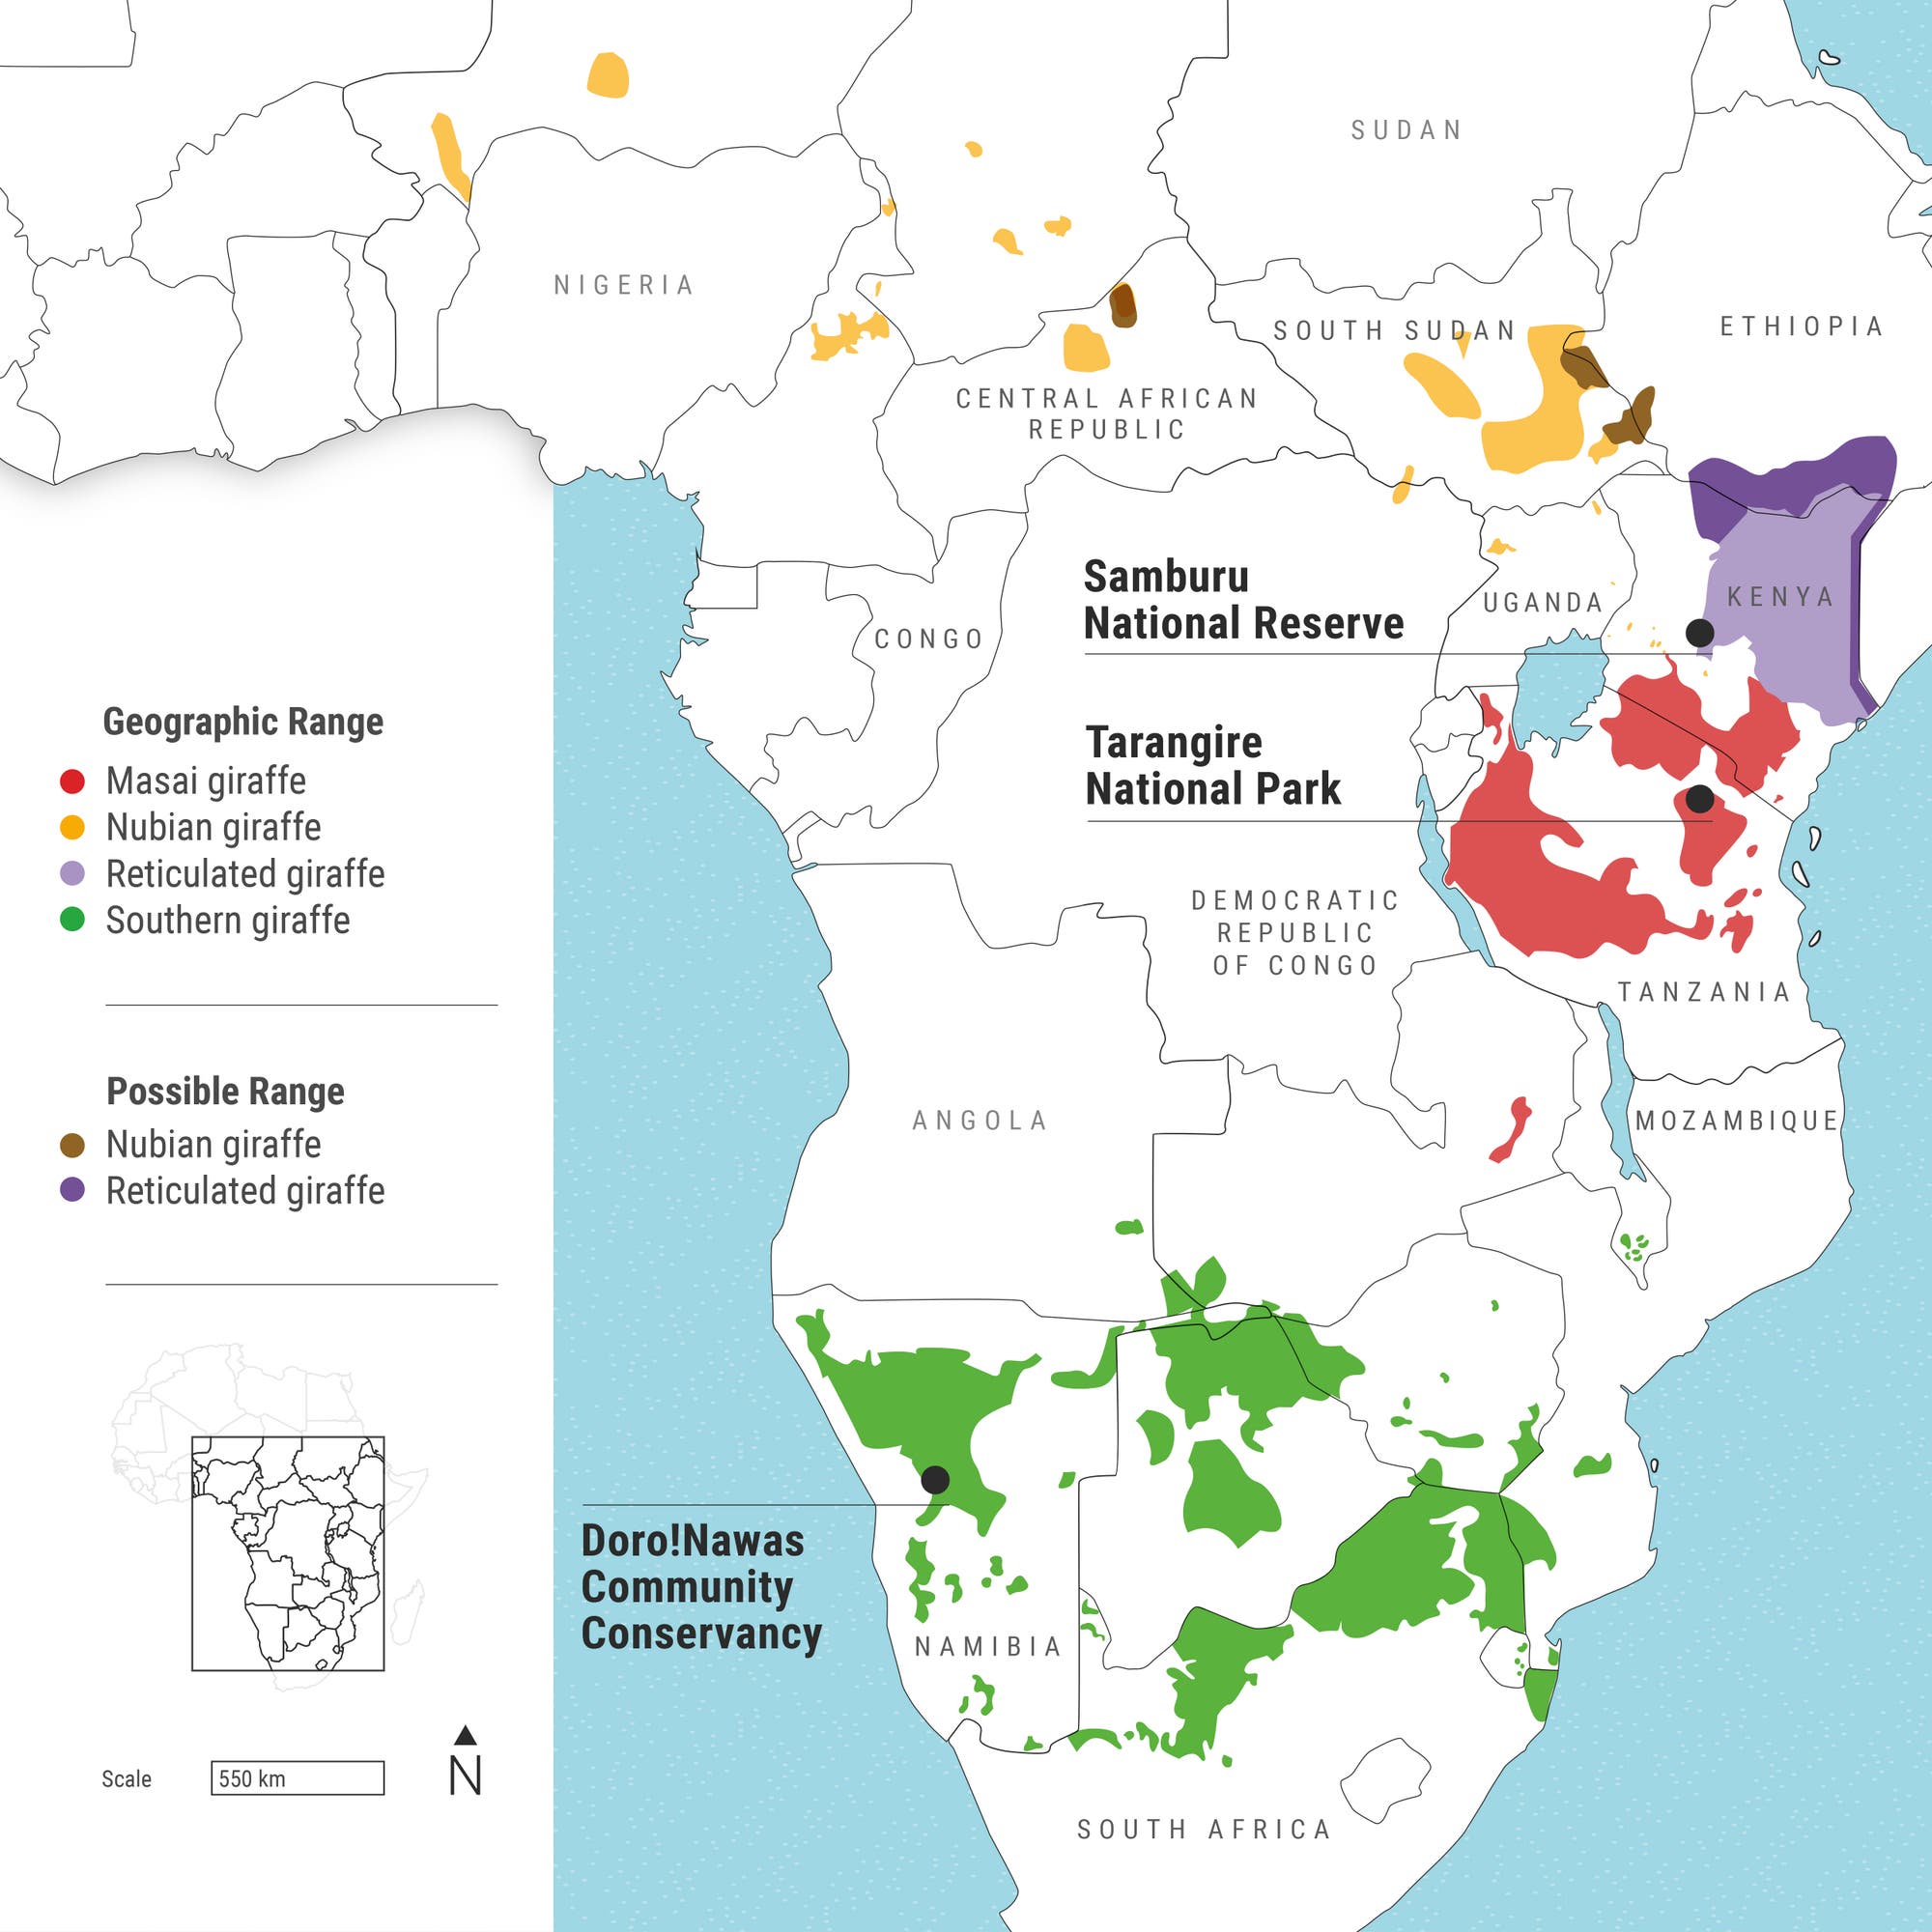 The map shows a highly fragmented giraffe habitat. In Central and East Africa in particular, it has shrunk considerably in the 20th century. The subdivision into four giraffe species made here is not generally accepted in science. 